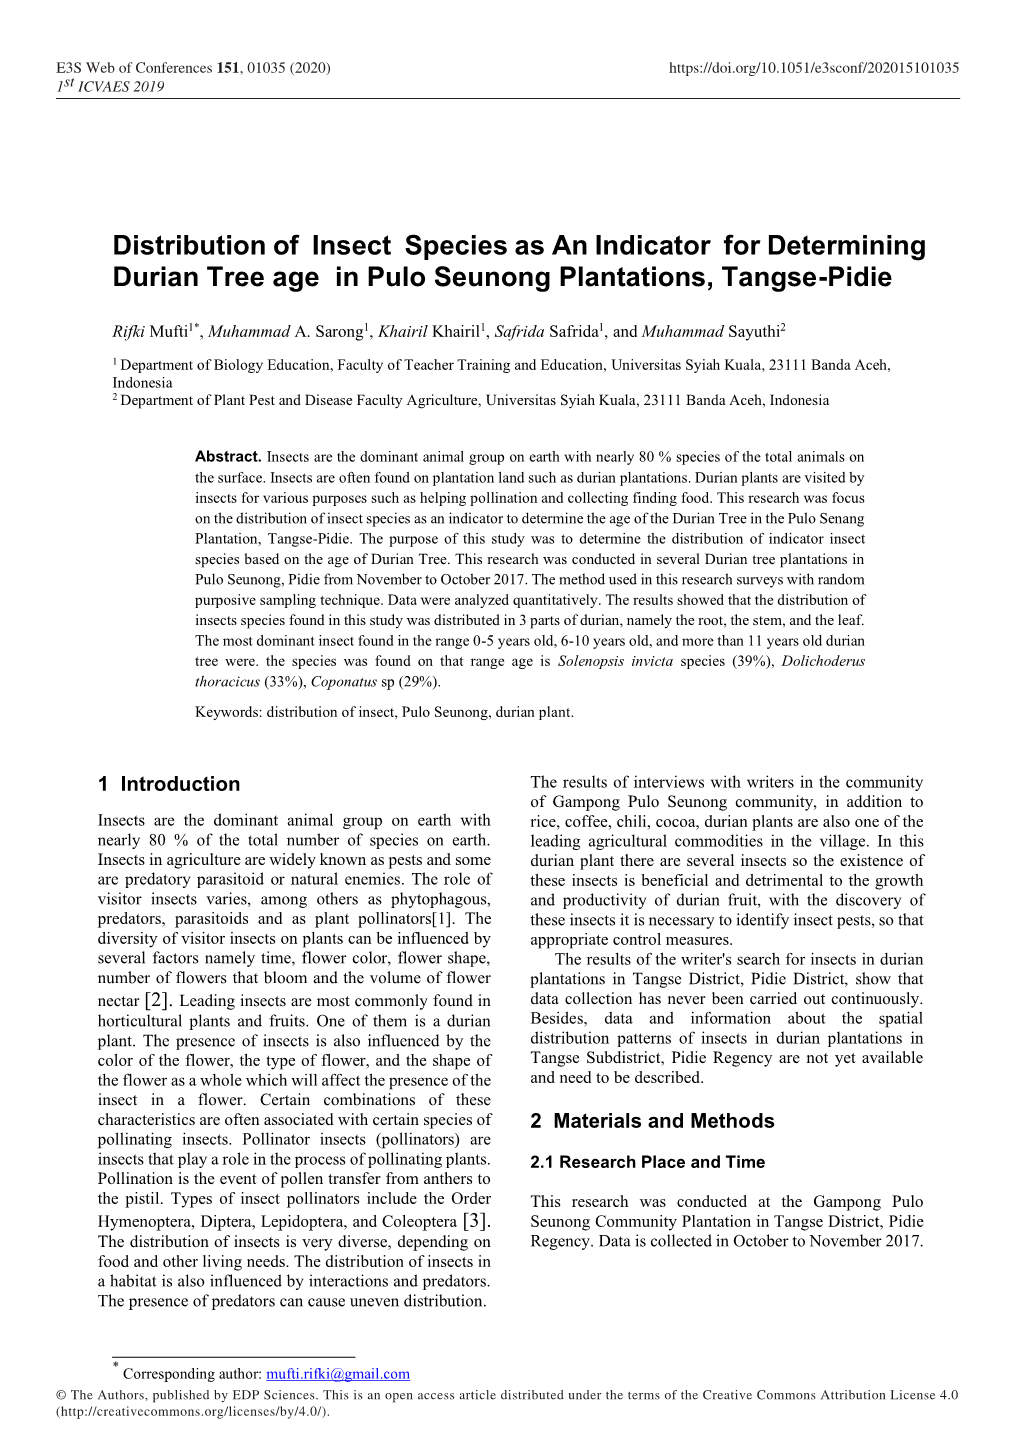 Distribution of Insect Species As an Indicator for Determining Durian Tree Age in Pulo Seunong Plantations, Tangse-Pidie